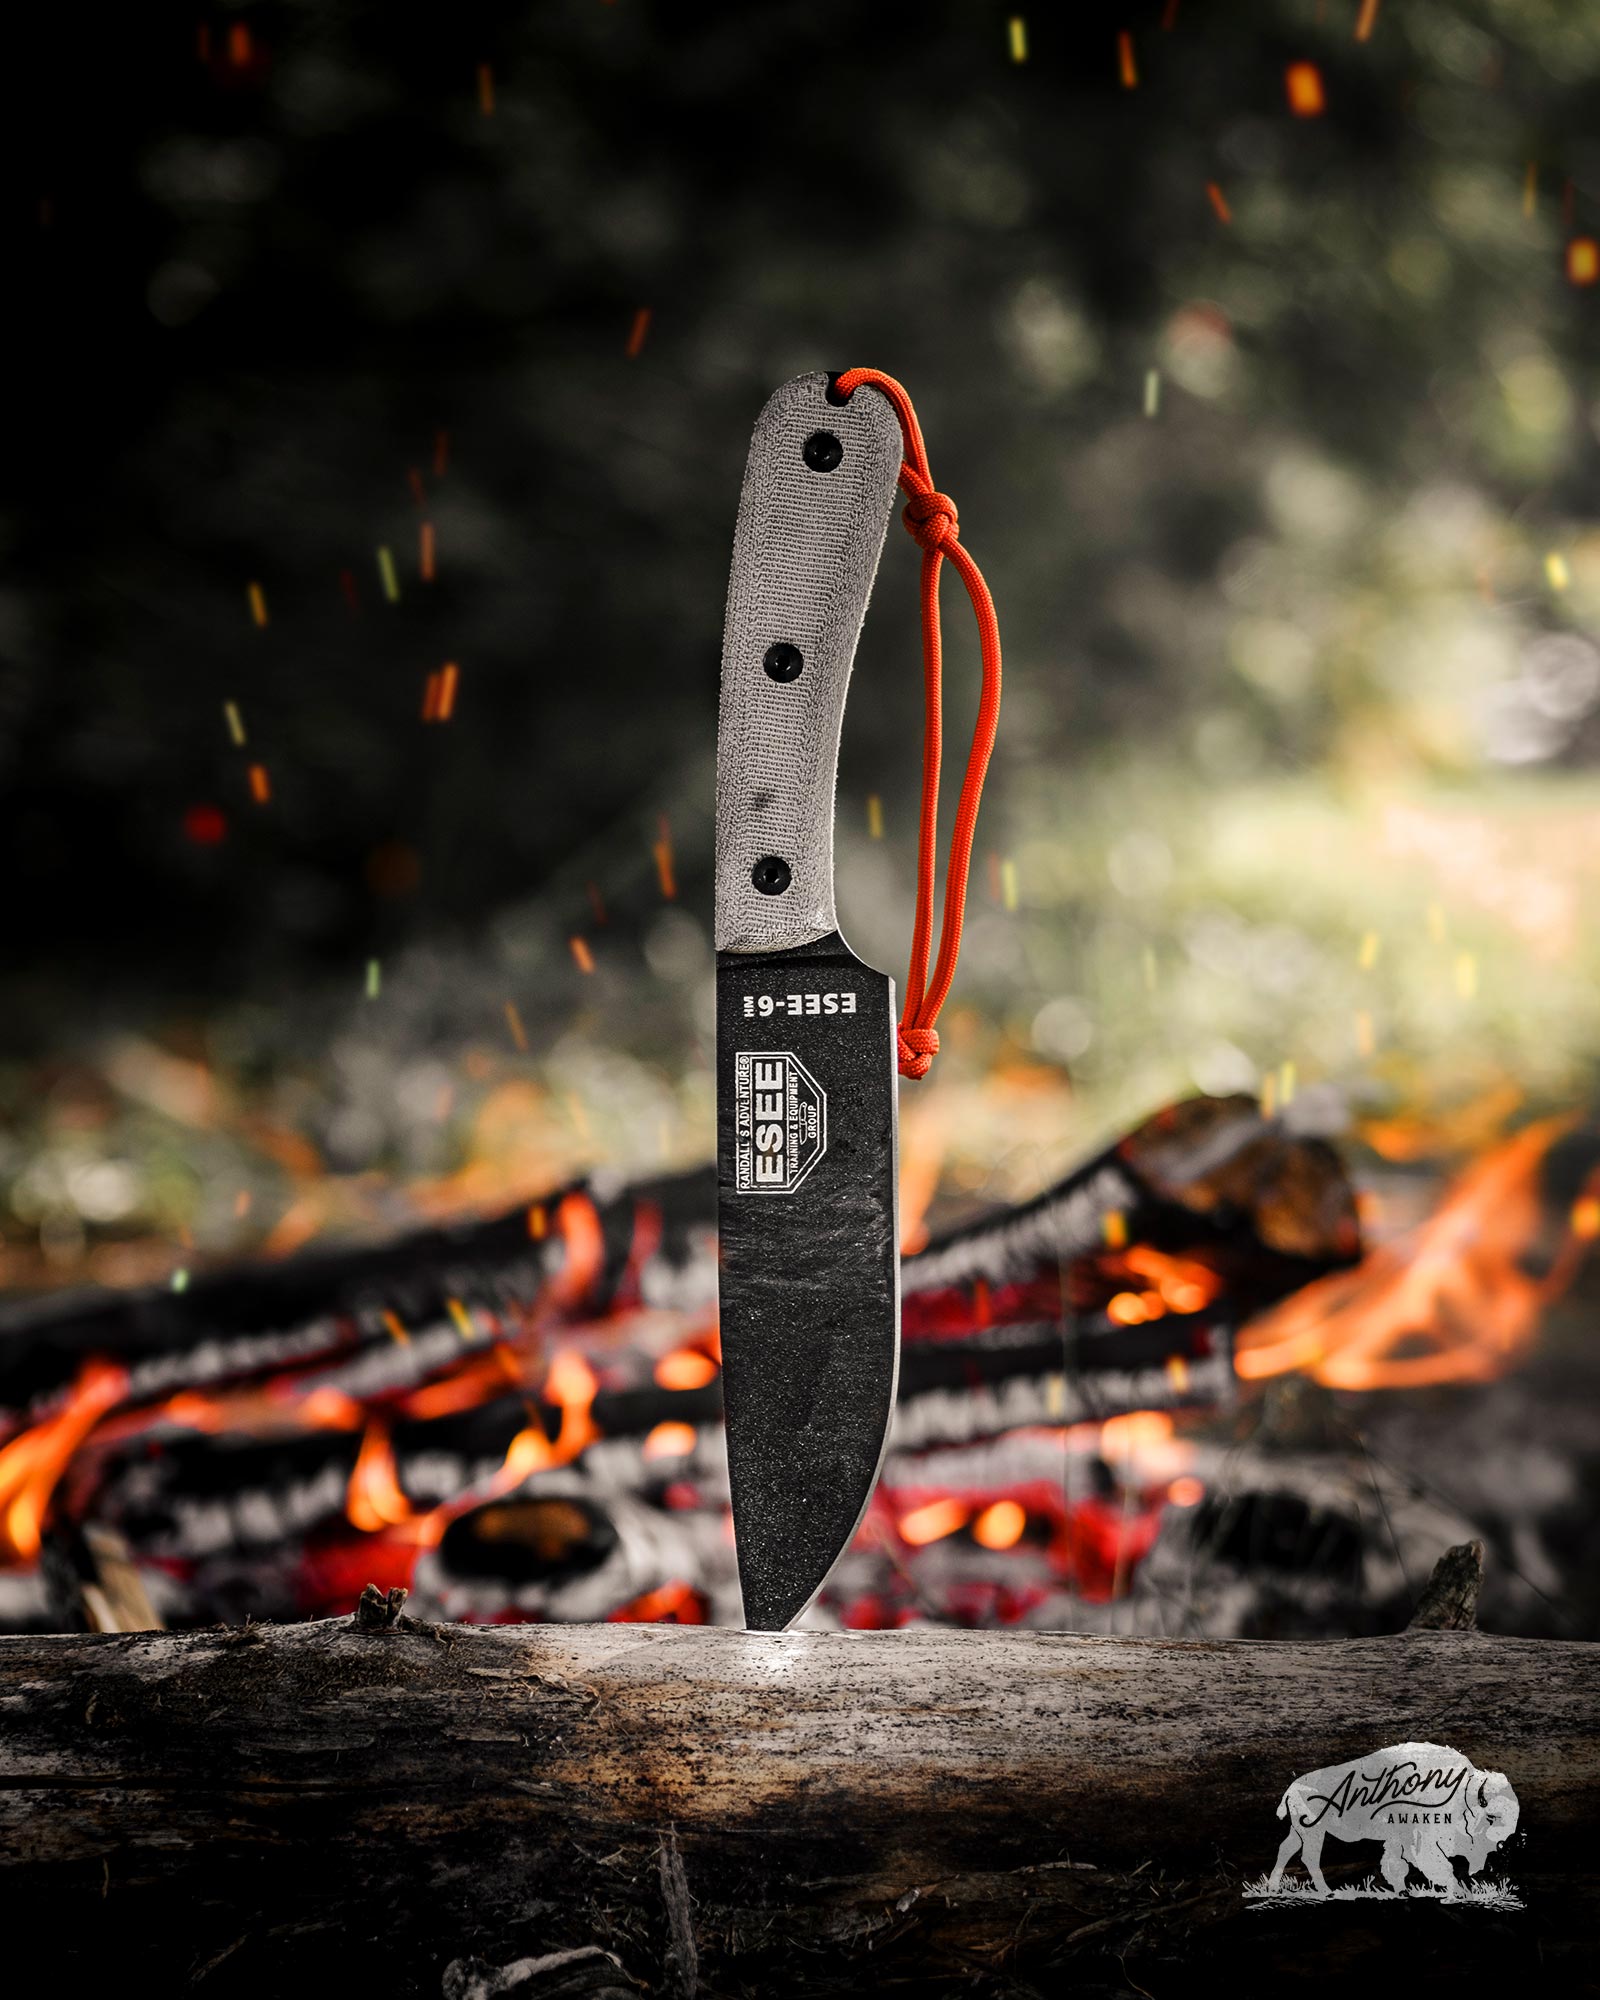 Esee 6HM Review • Esee 6HM Mods, Bow Drill, In-Field Experience